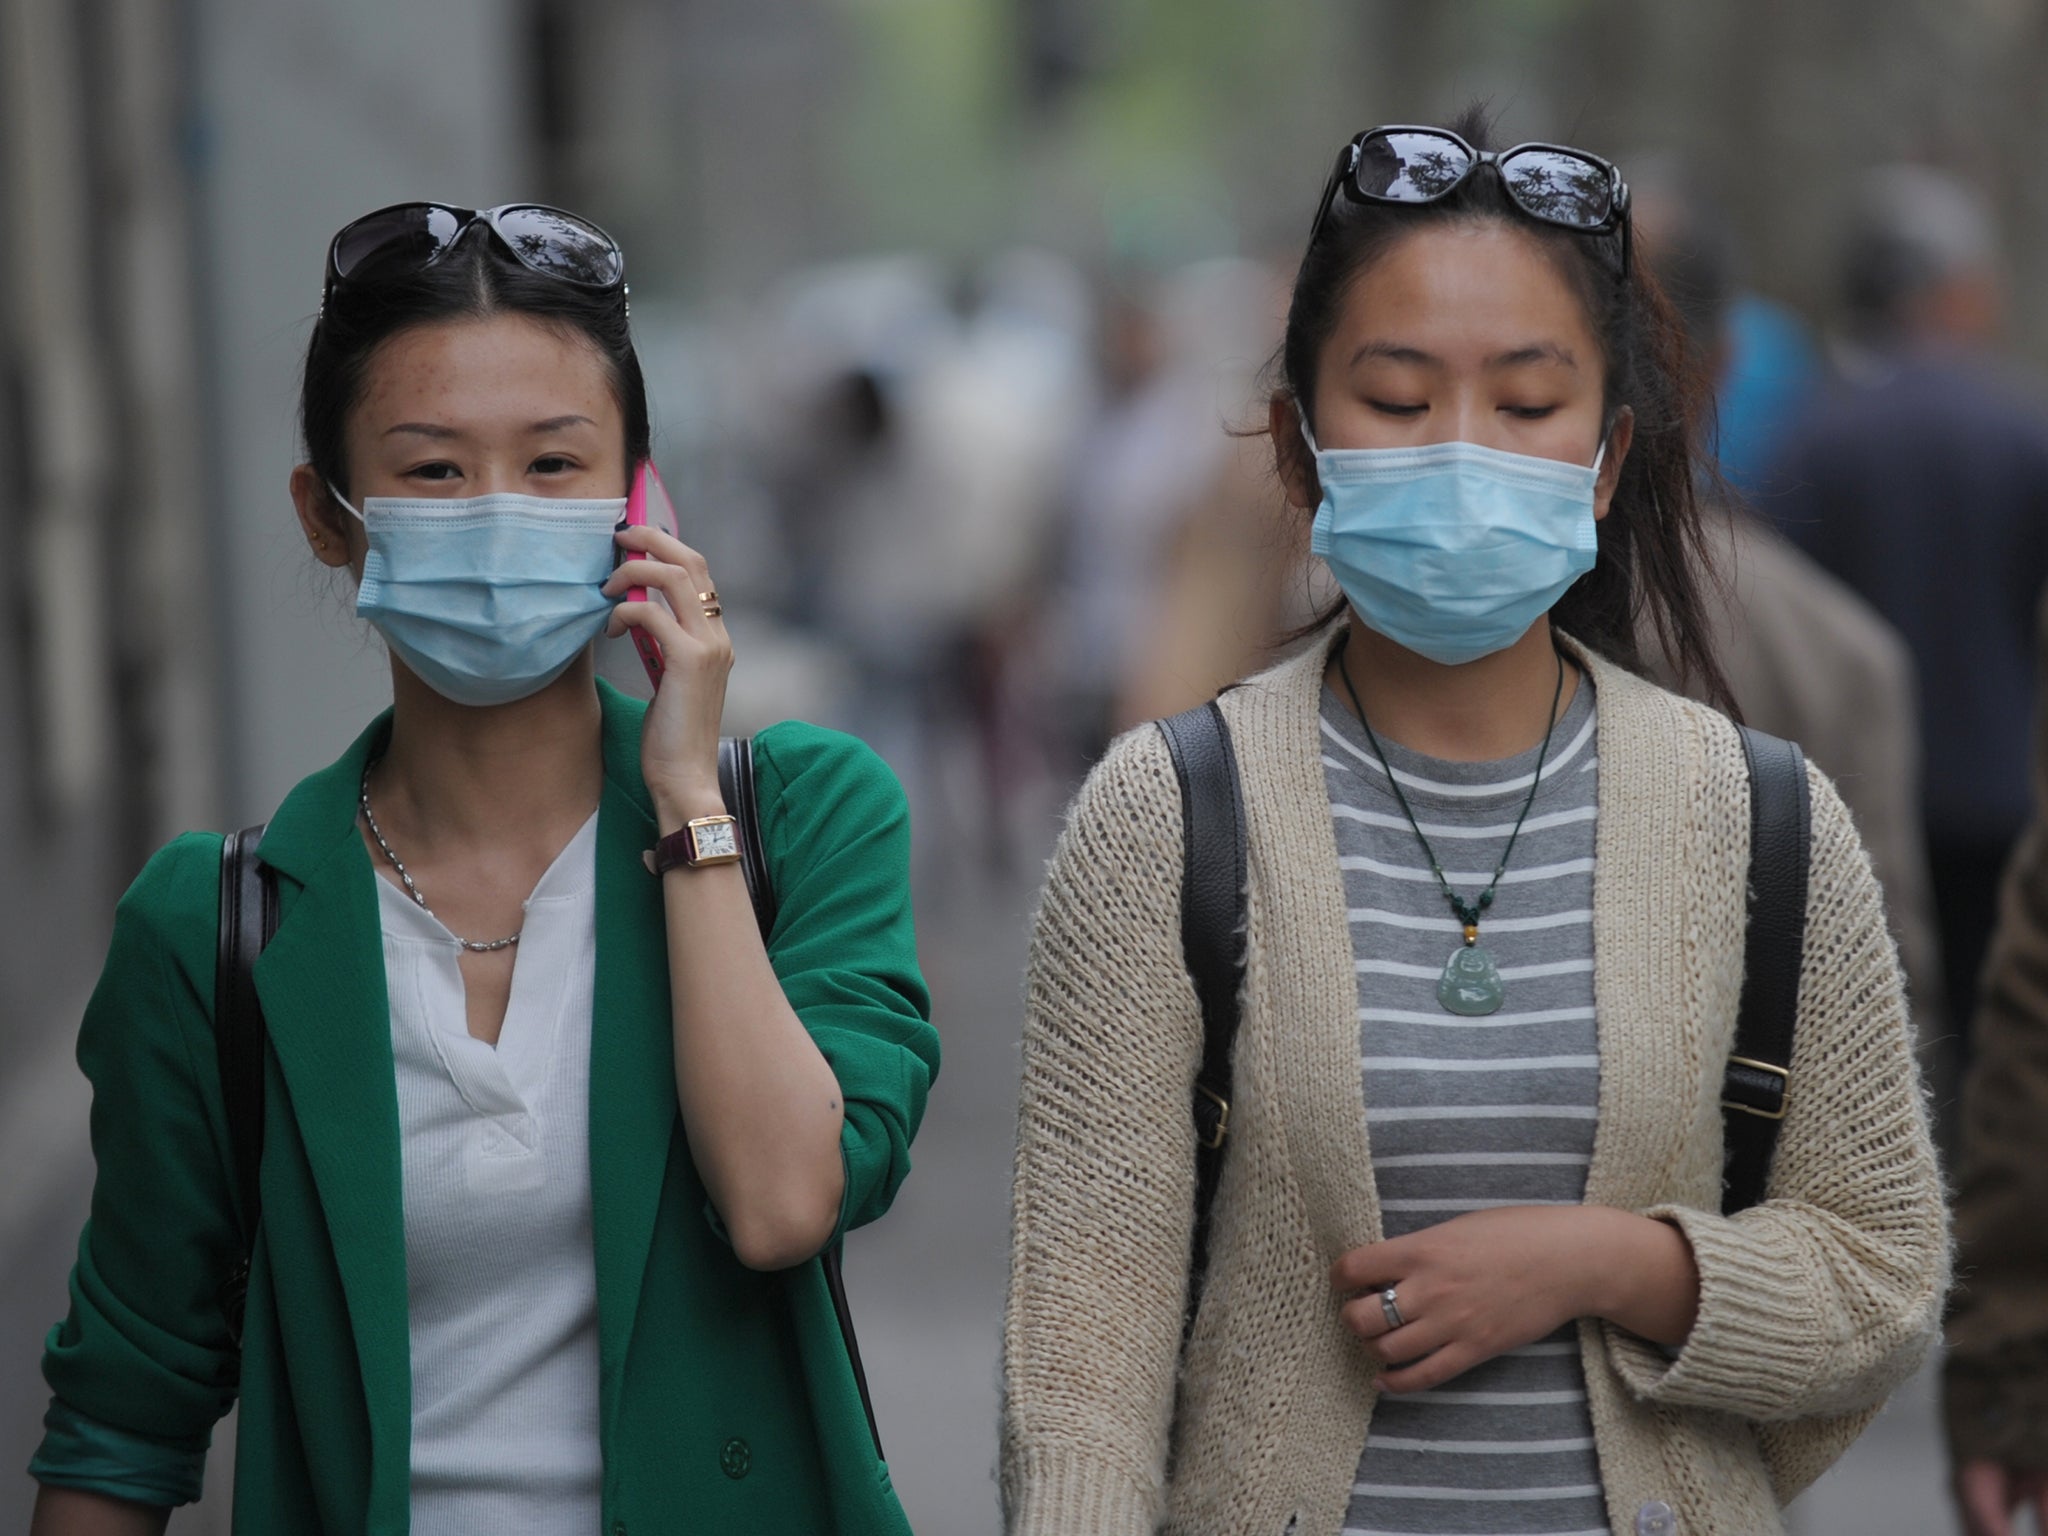 The deadly H7N9 strain of bird flu hit China in 2013